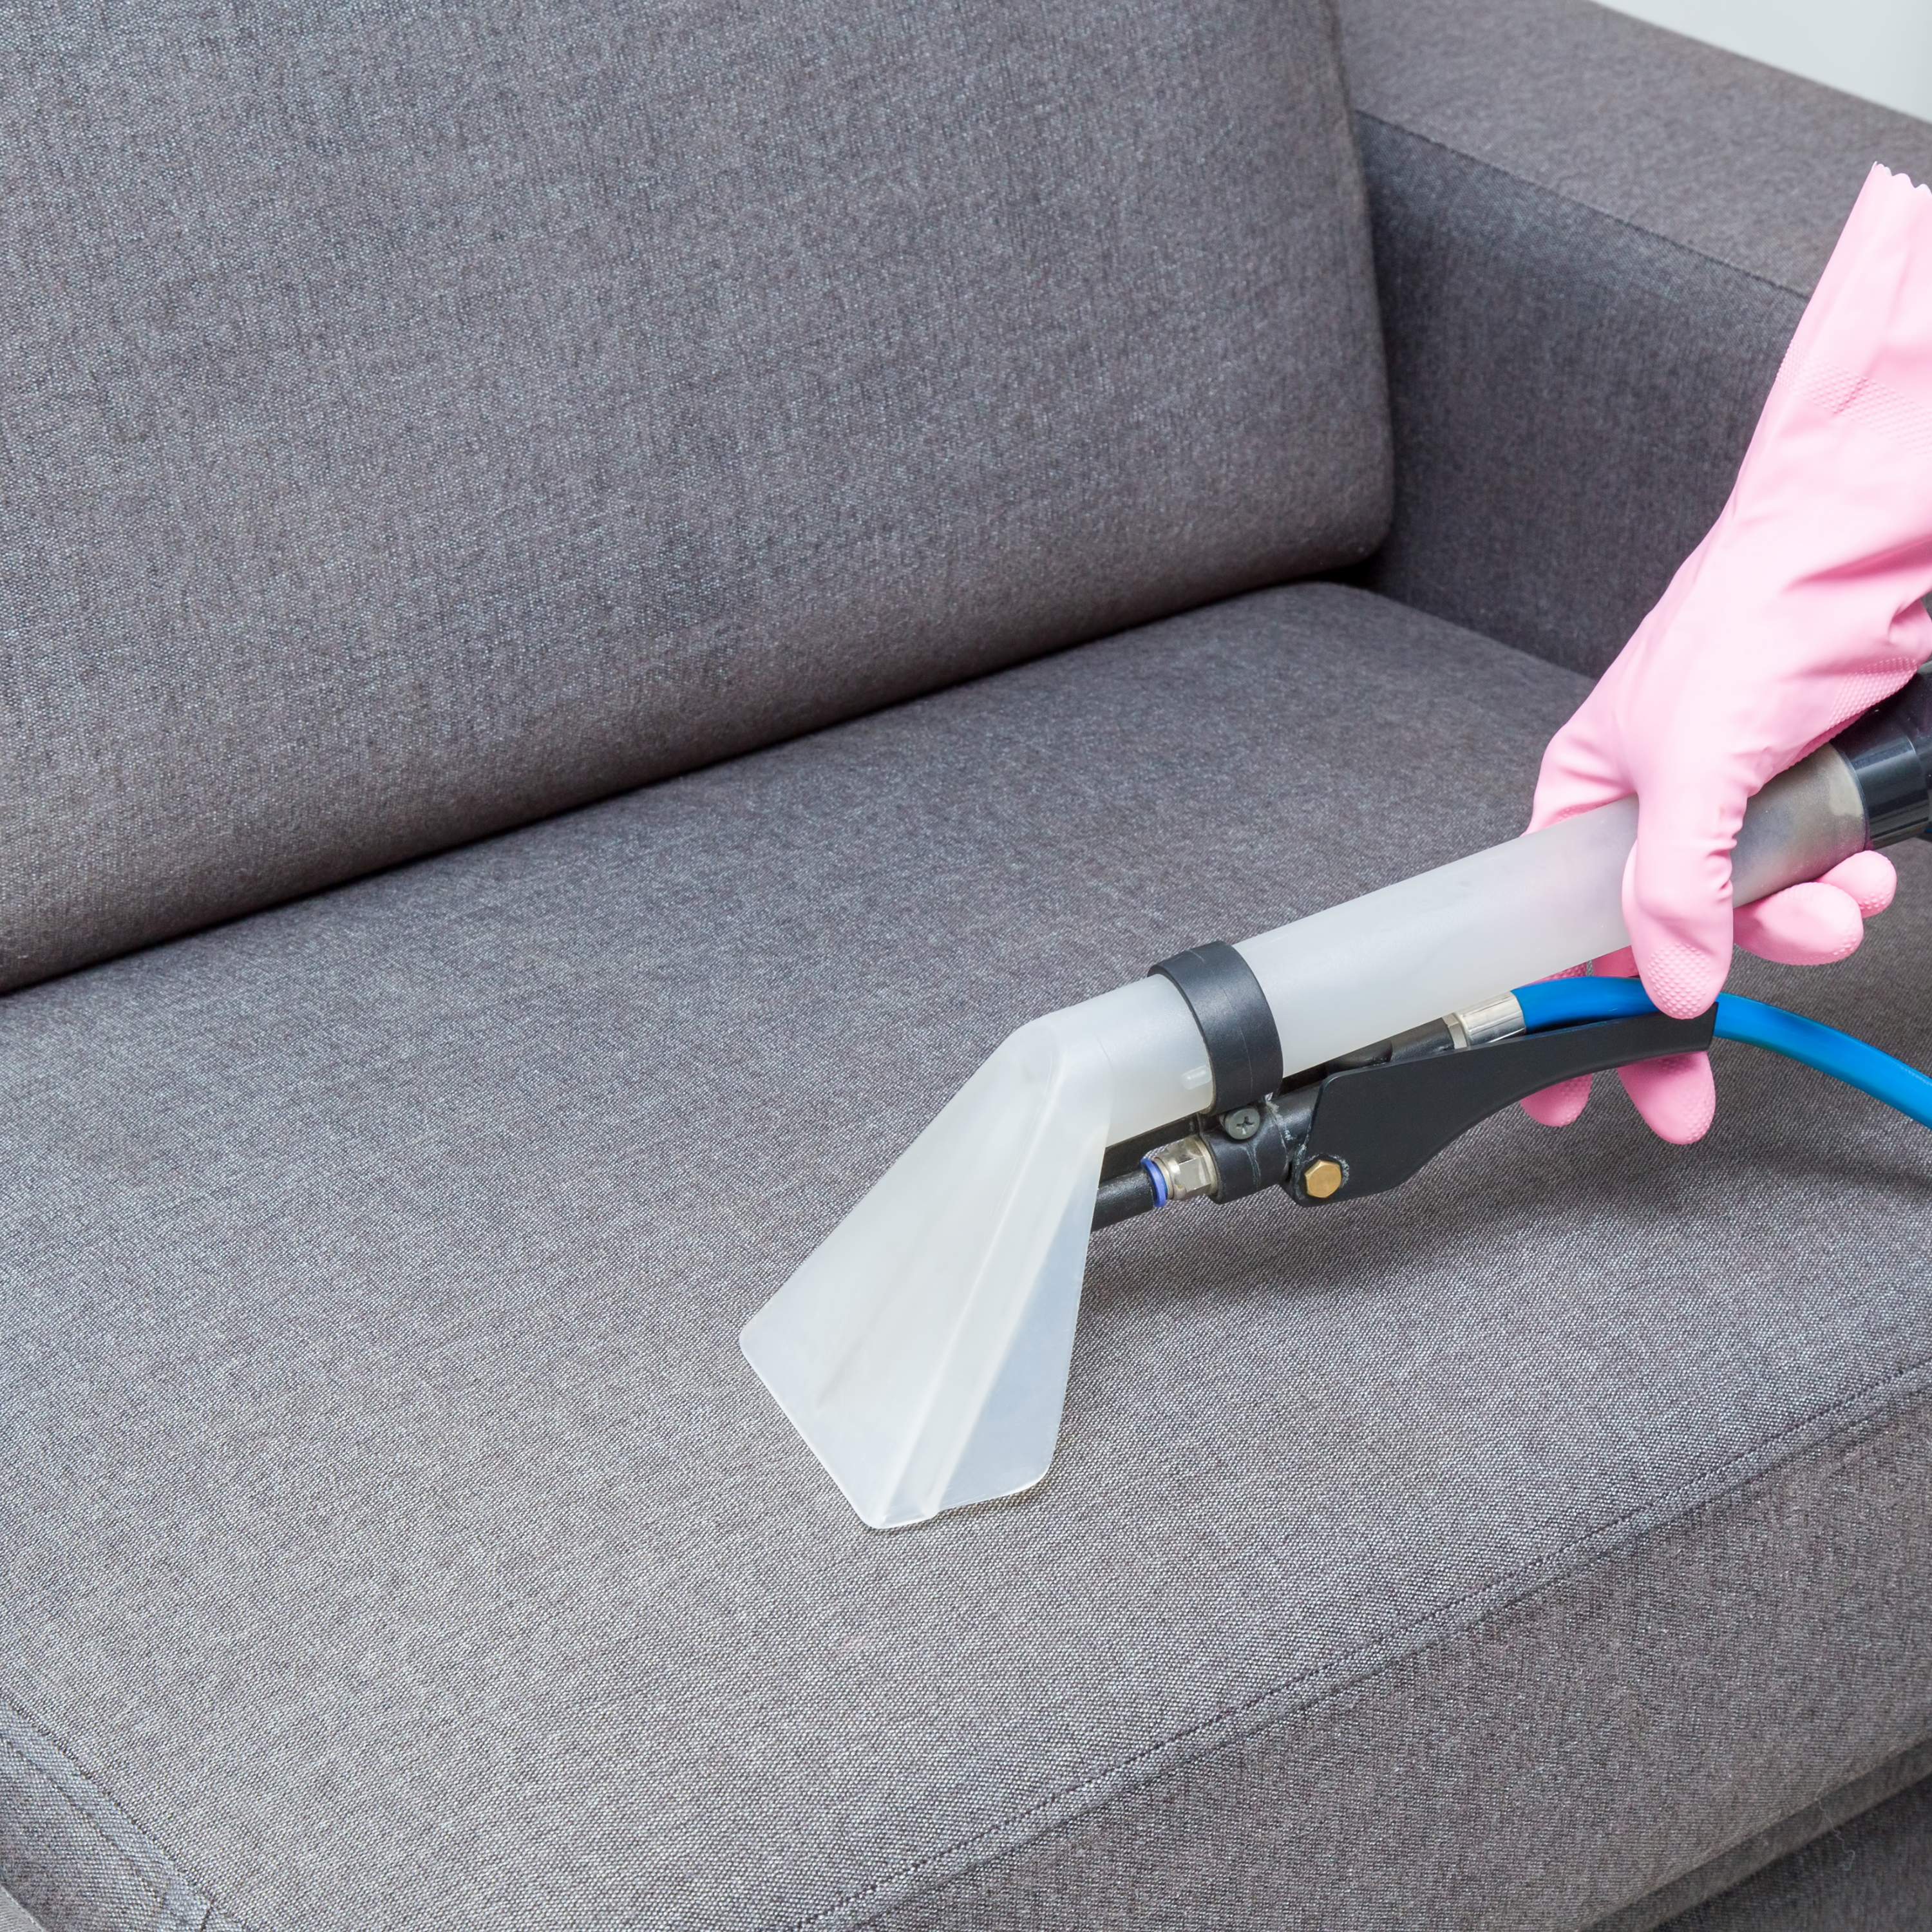 Upholstery Cleaning